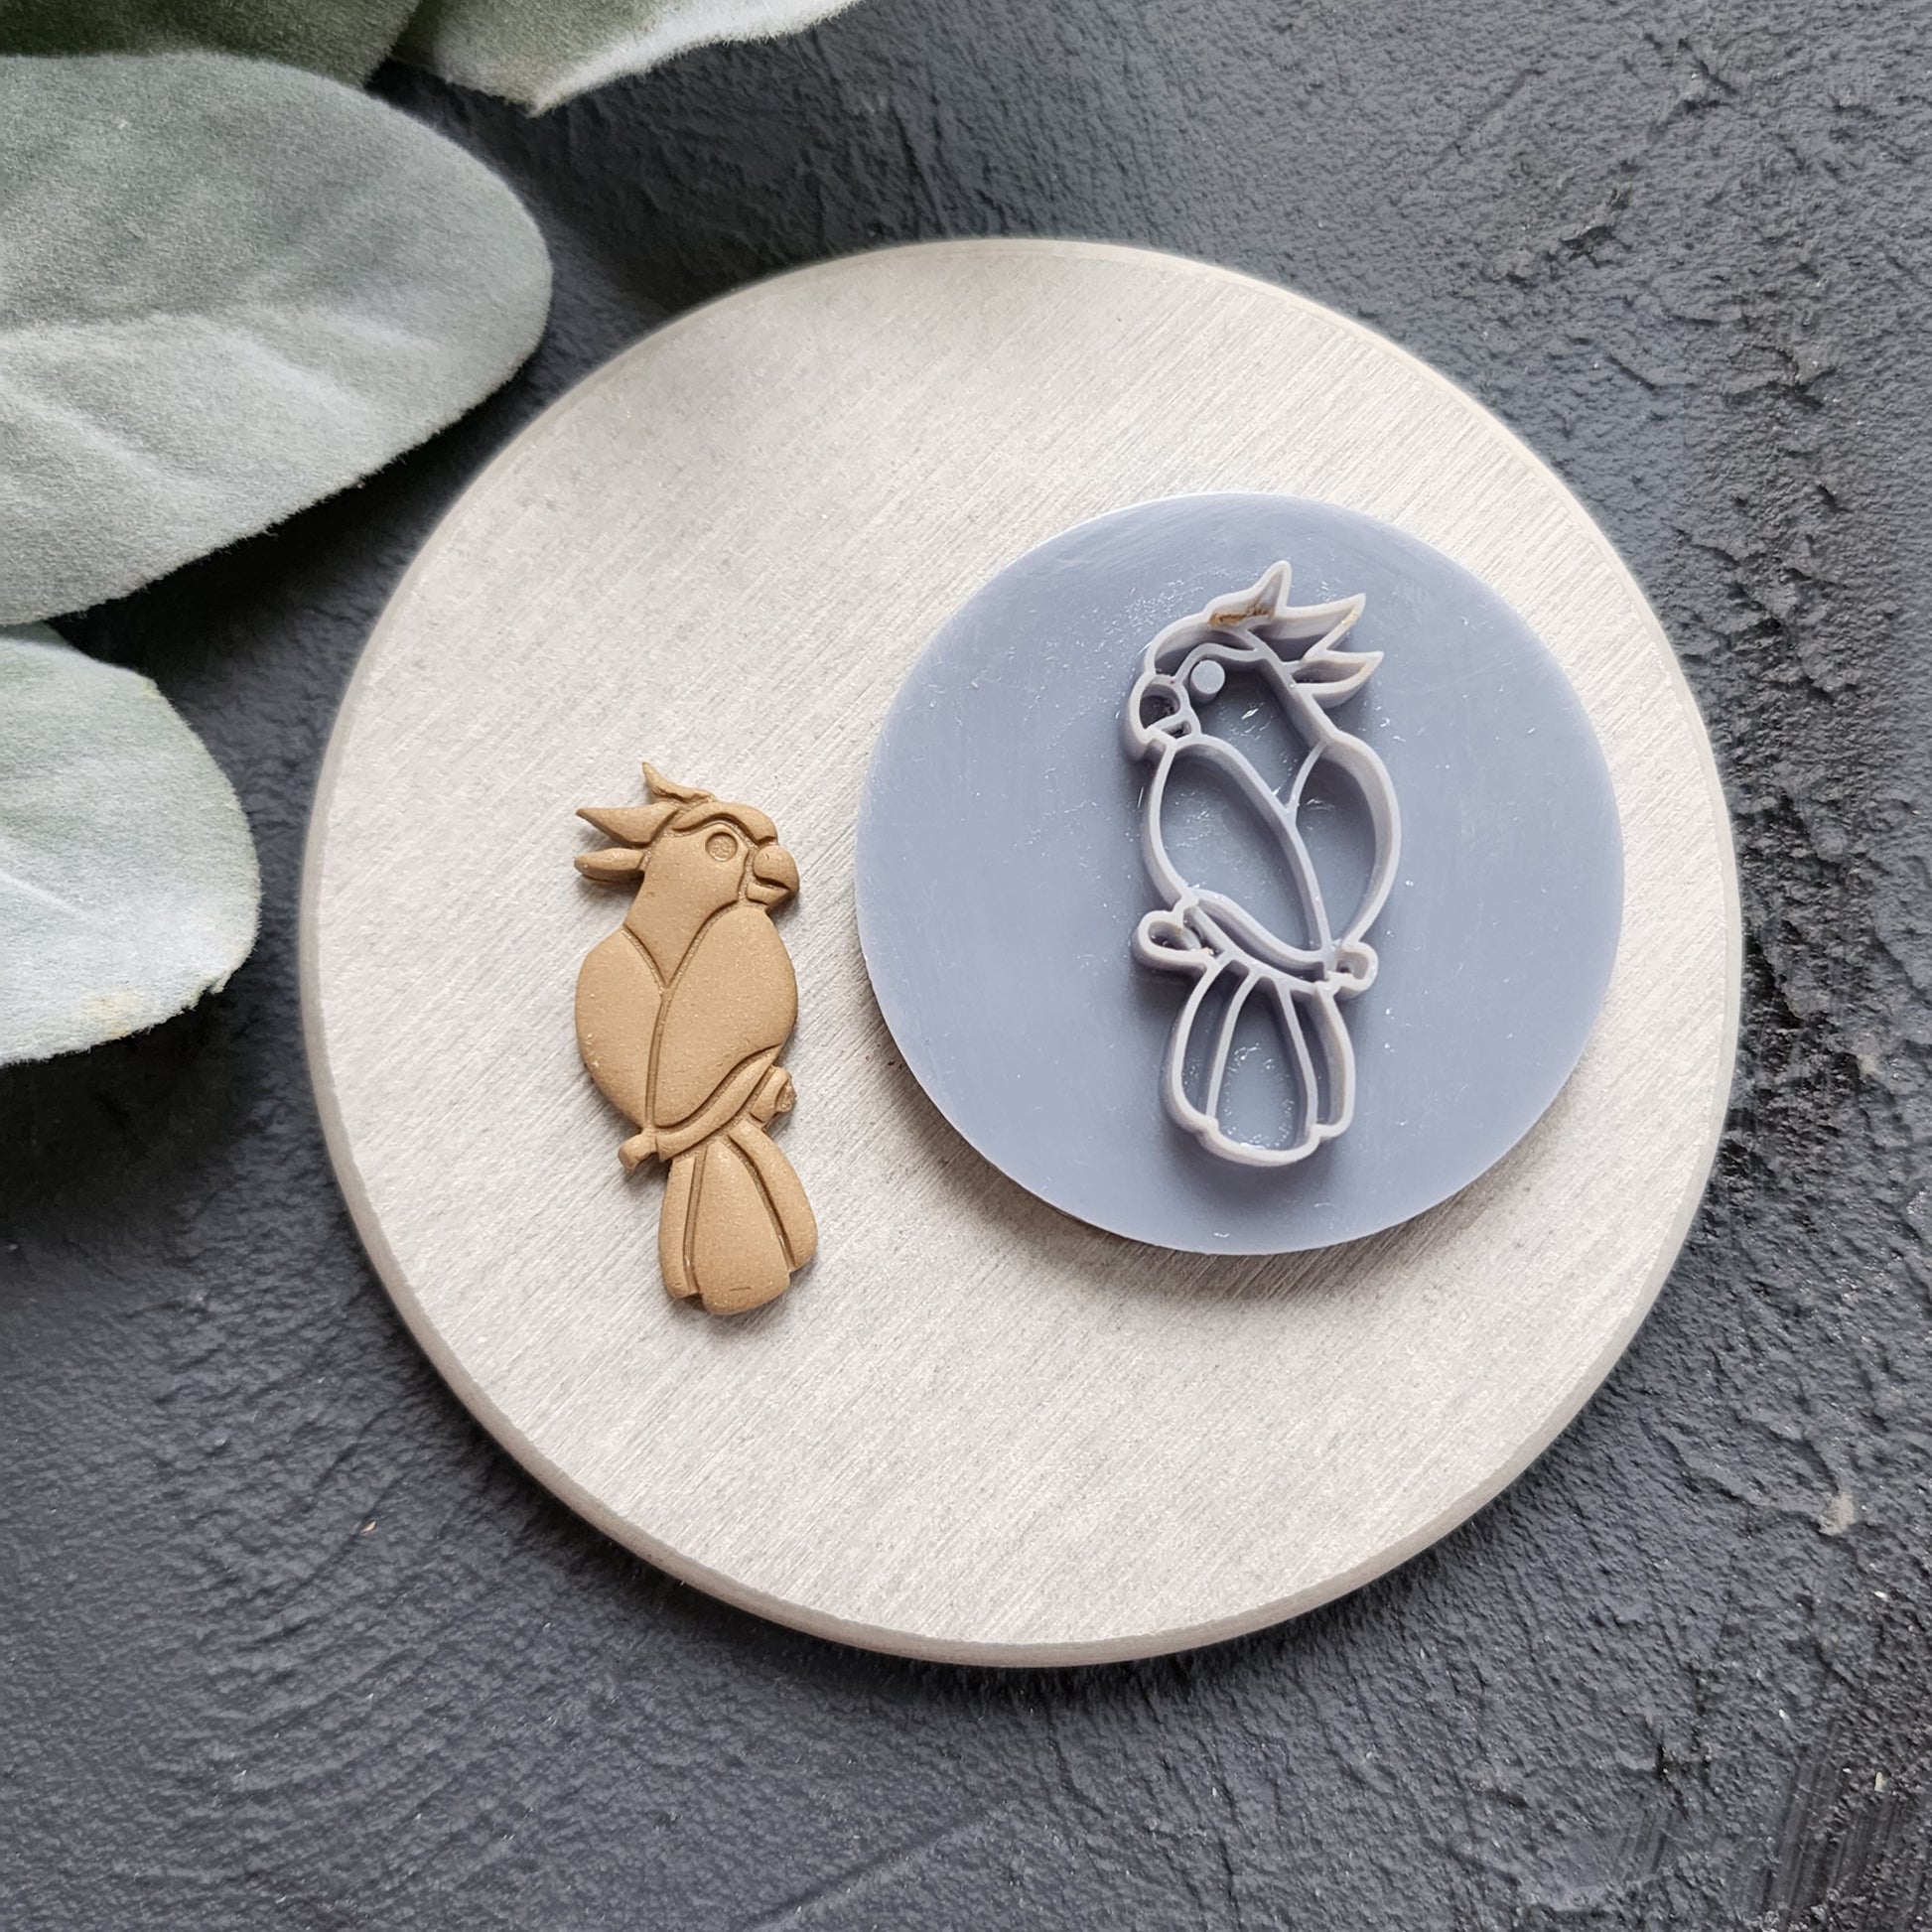 Polymer Clay cutters "Parrot" Earrings sharp clay cutter stamp Jewelry cutters Earrings molds Polymer clay tool Clay supplies Summer cutters